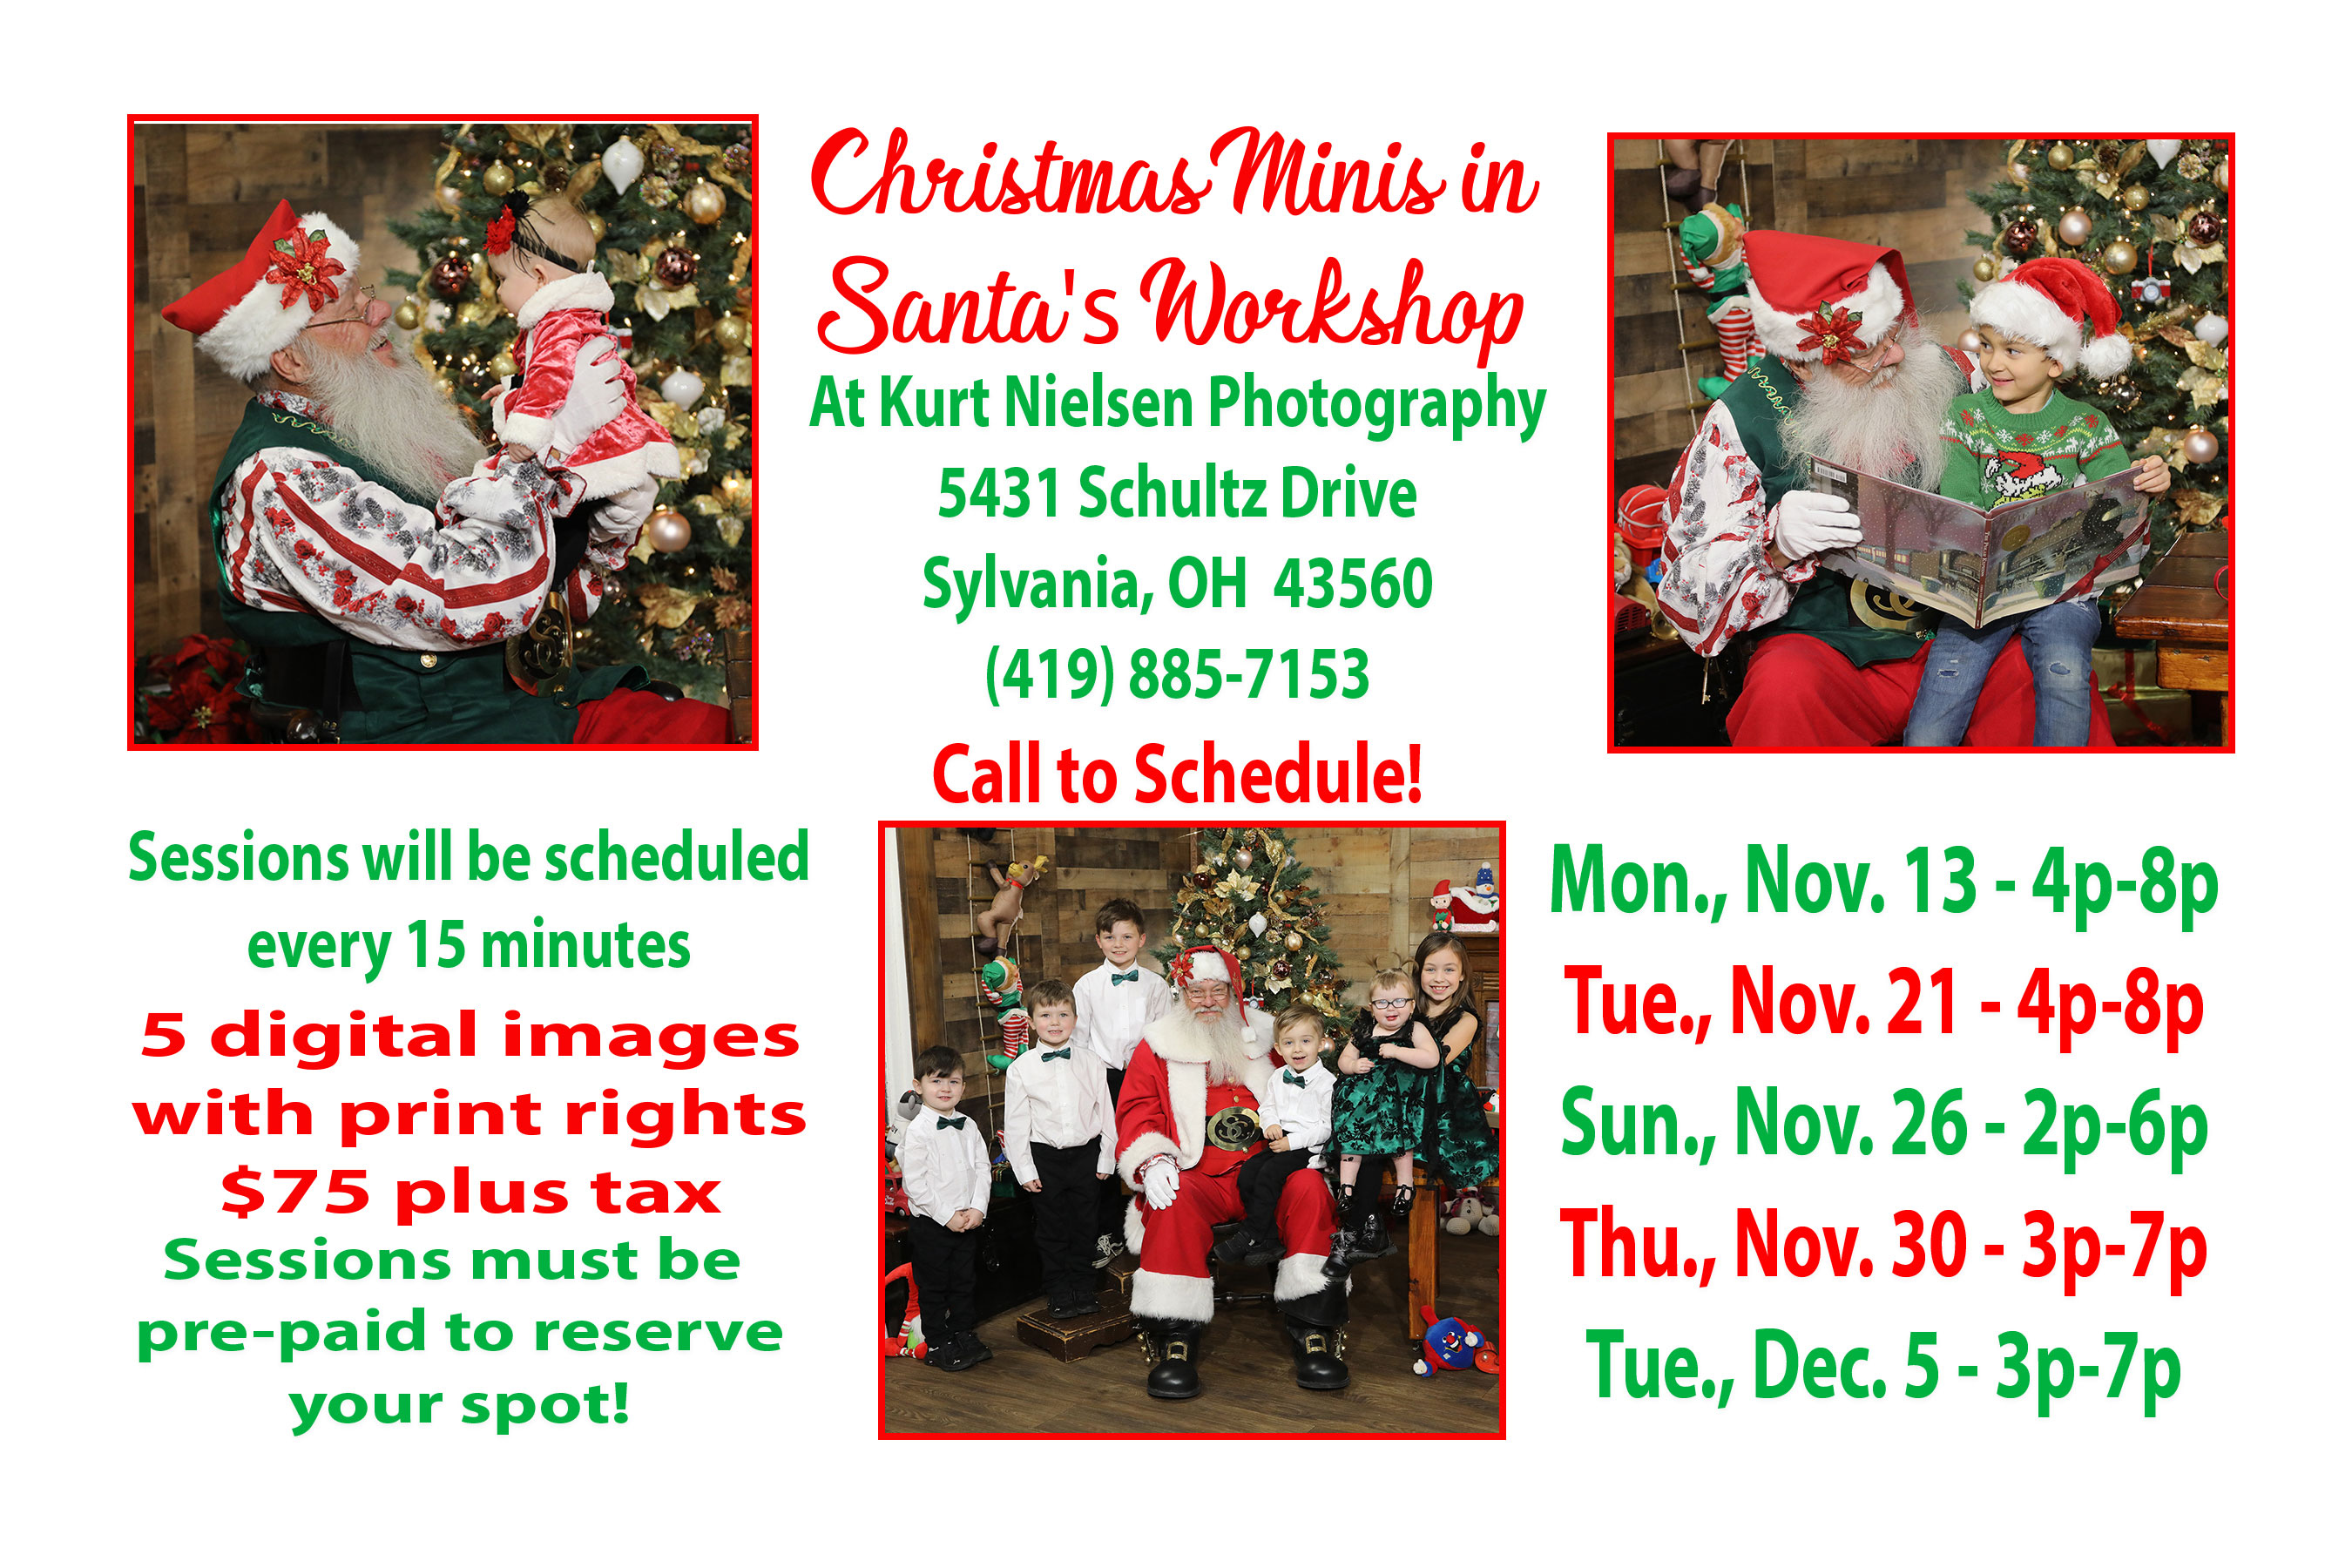 Christmas Mini photo sessions with Santa and Mrs. Claus that are perfect for kids of all ages